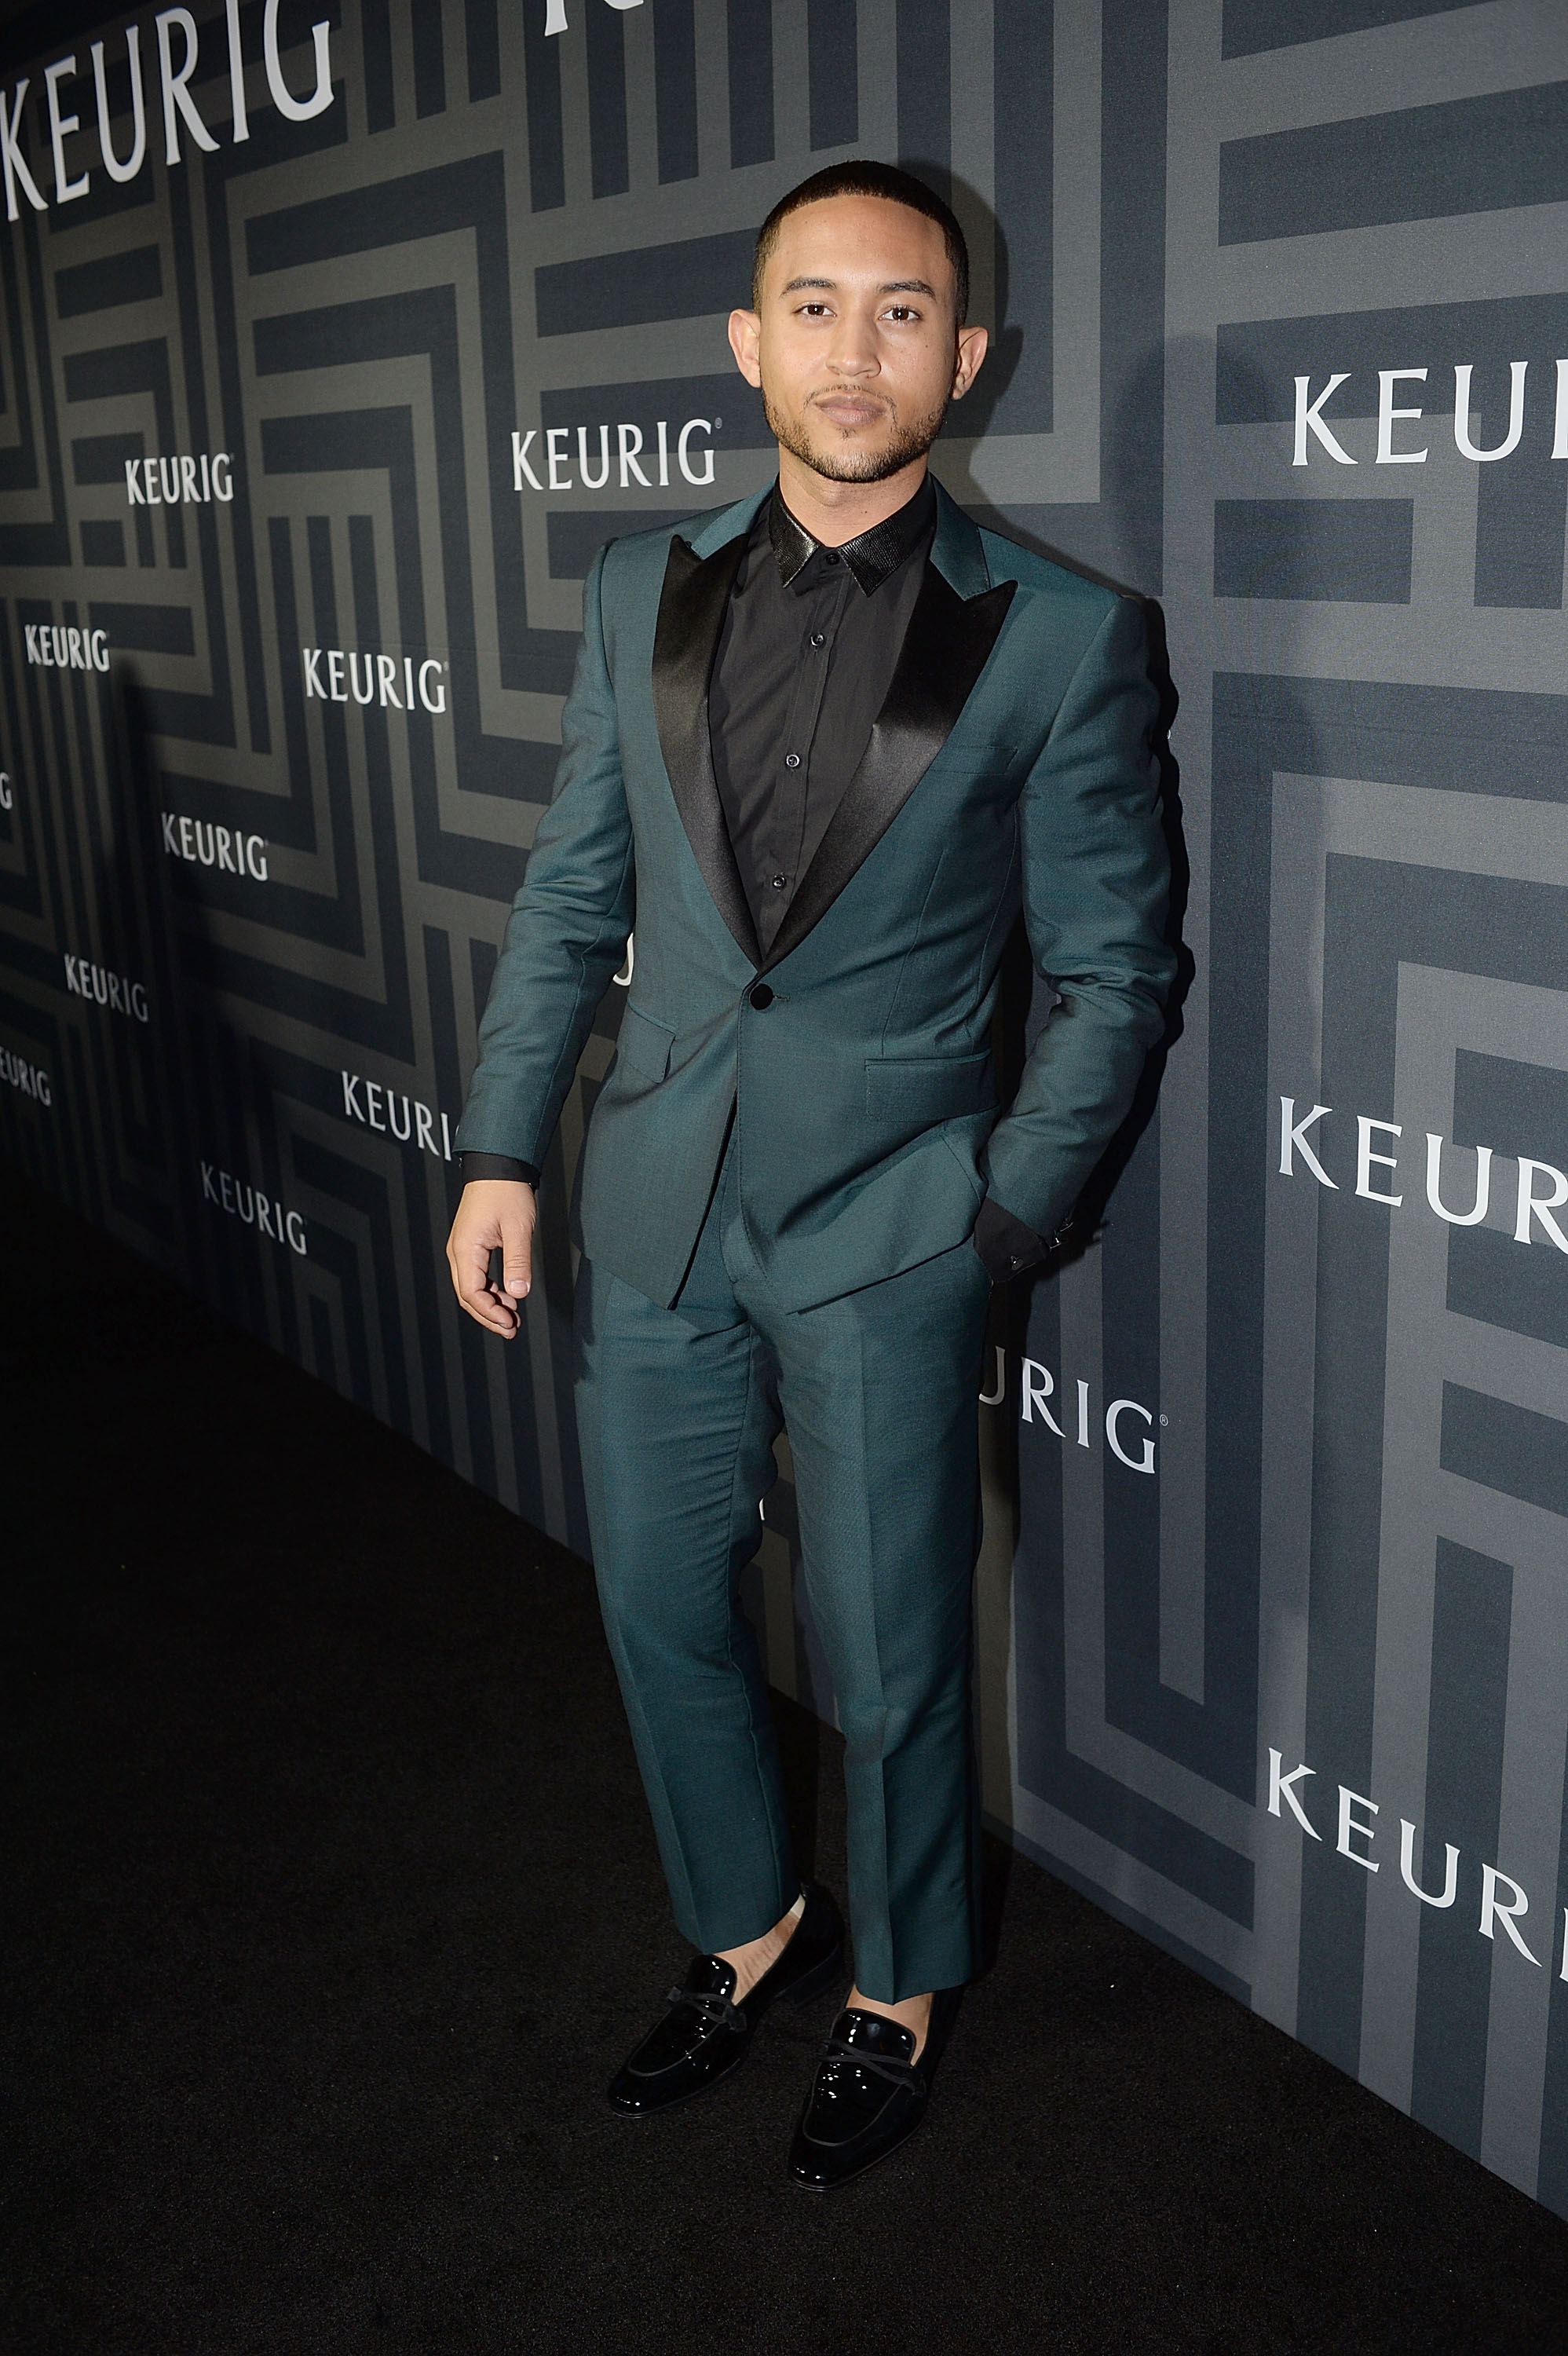 Actor Tahj Mowry attends the Keurig Grammy's afterparty at Continental Club